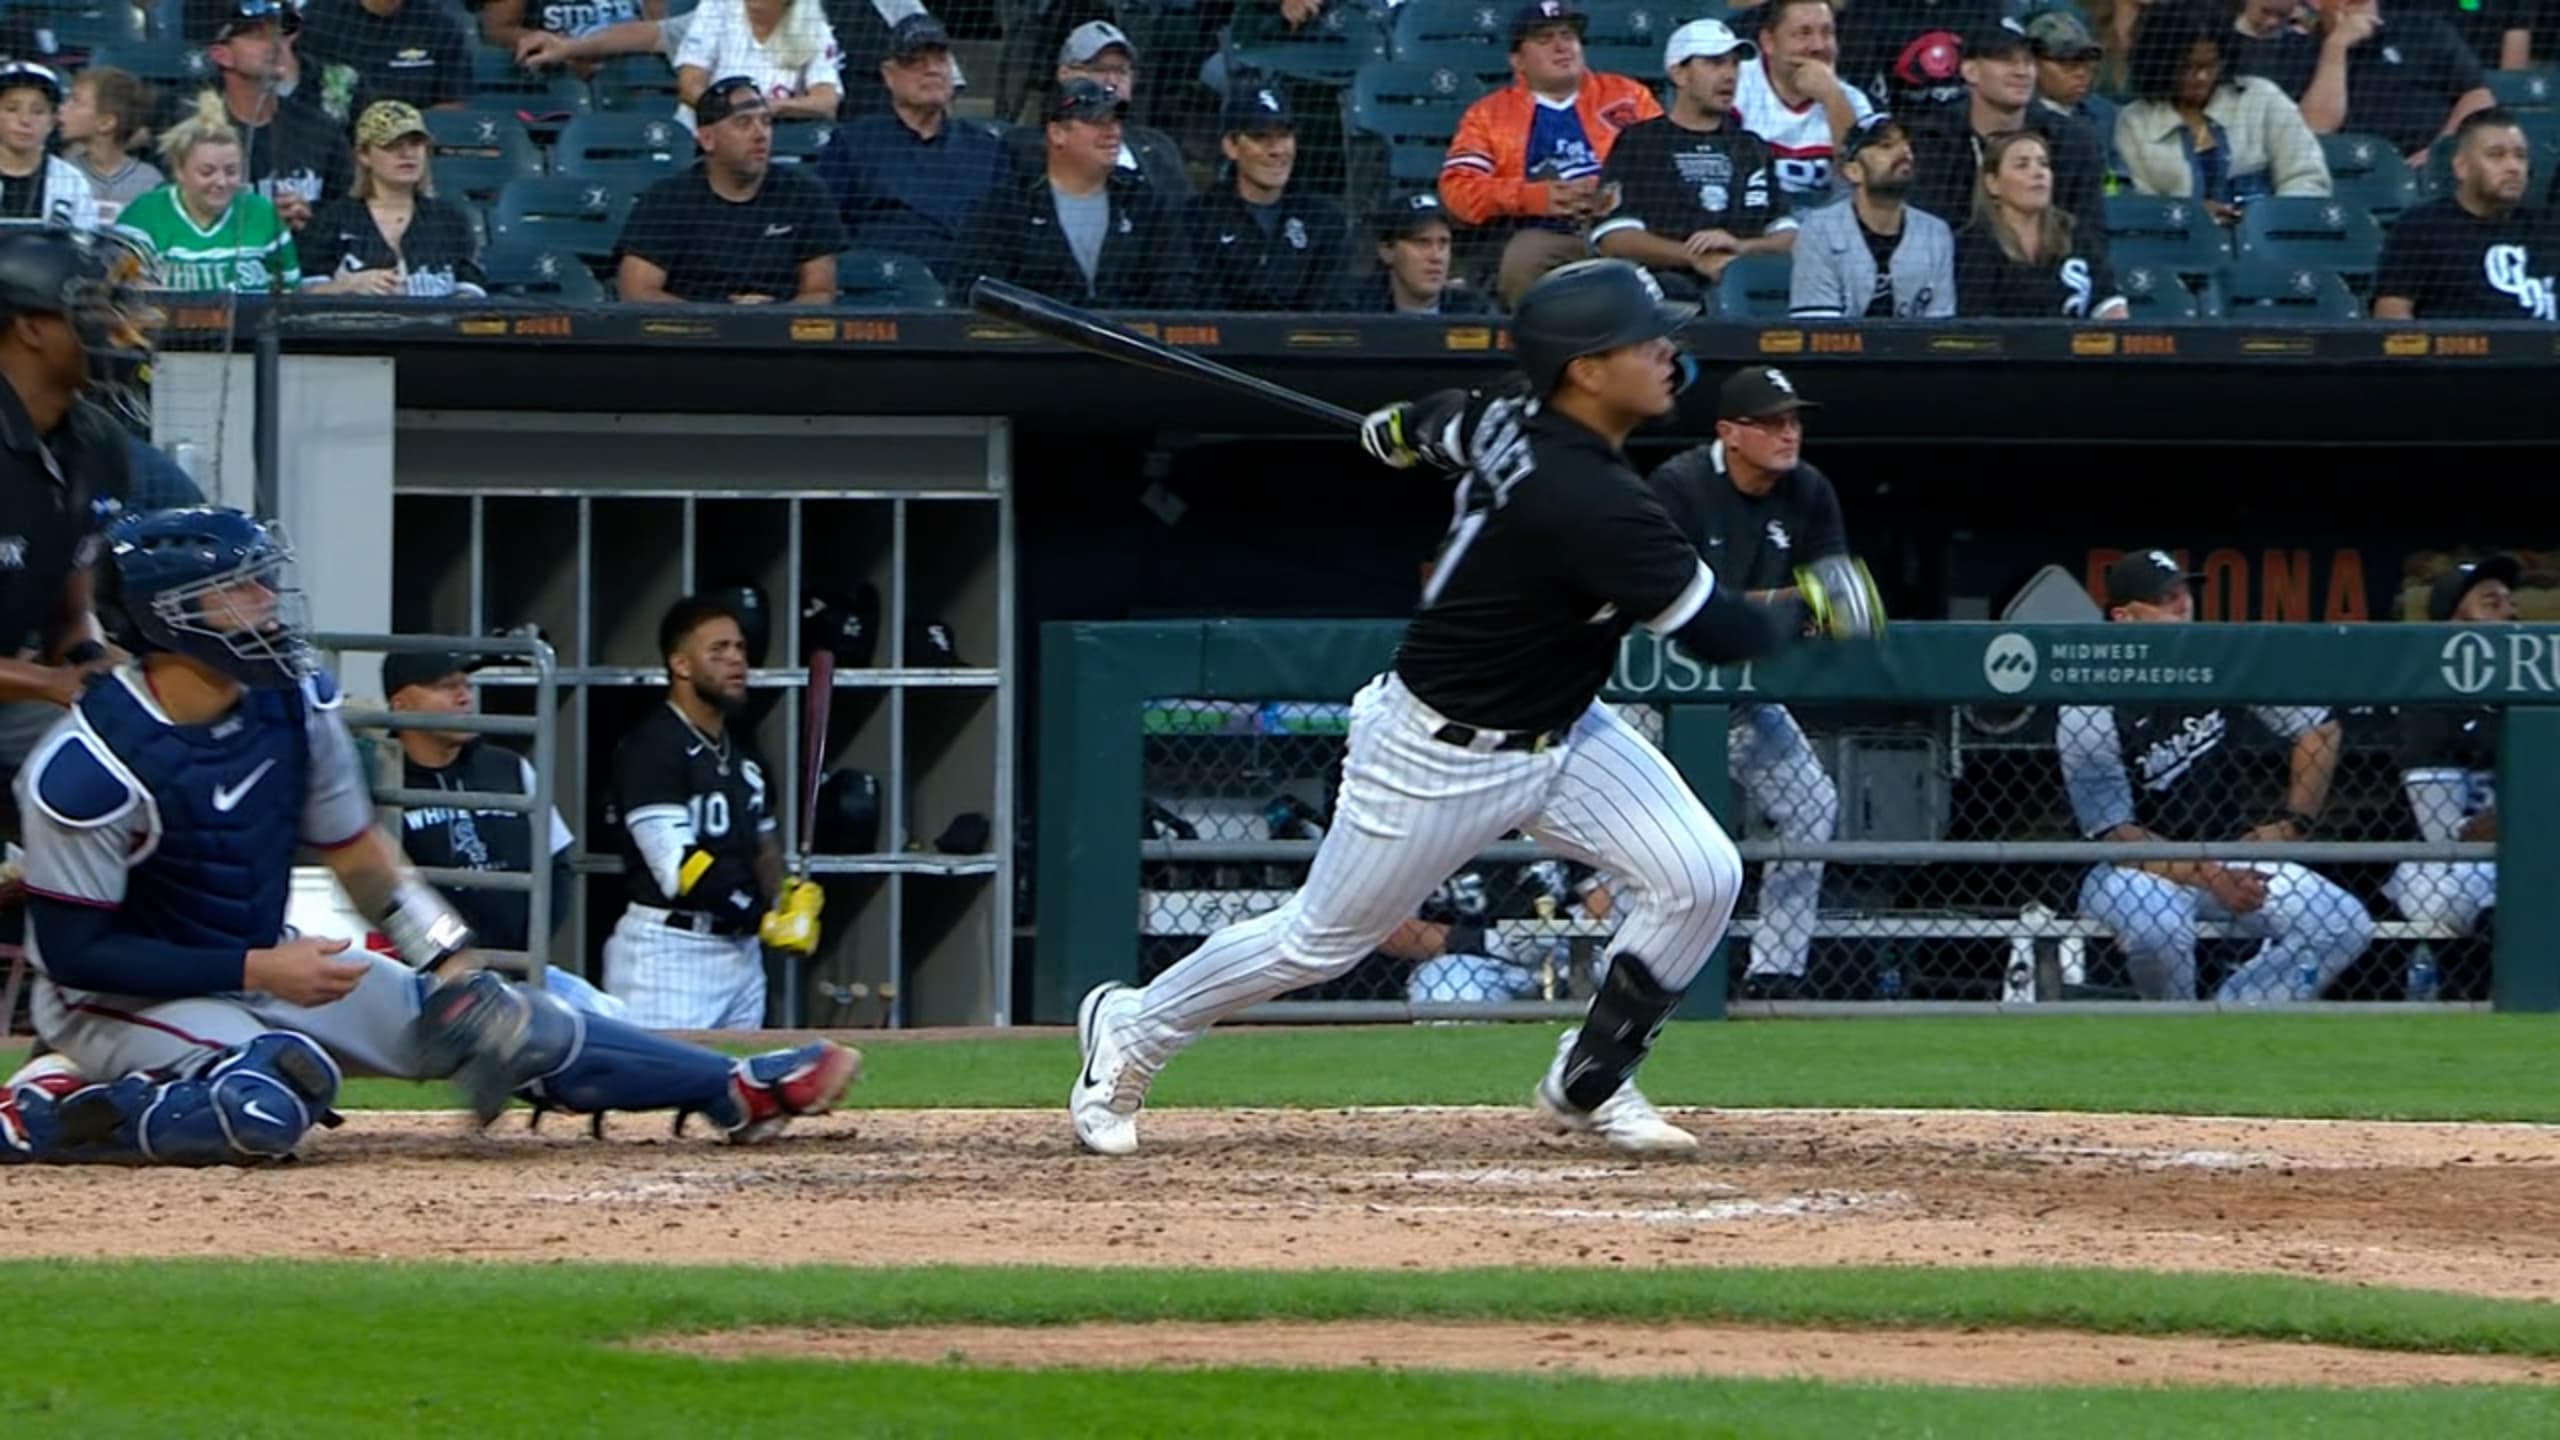 Reckless Recap: 8/14/15 Cubs 6/White Sox 5 South Side Slugging